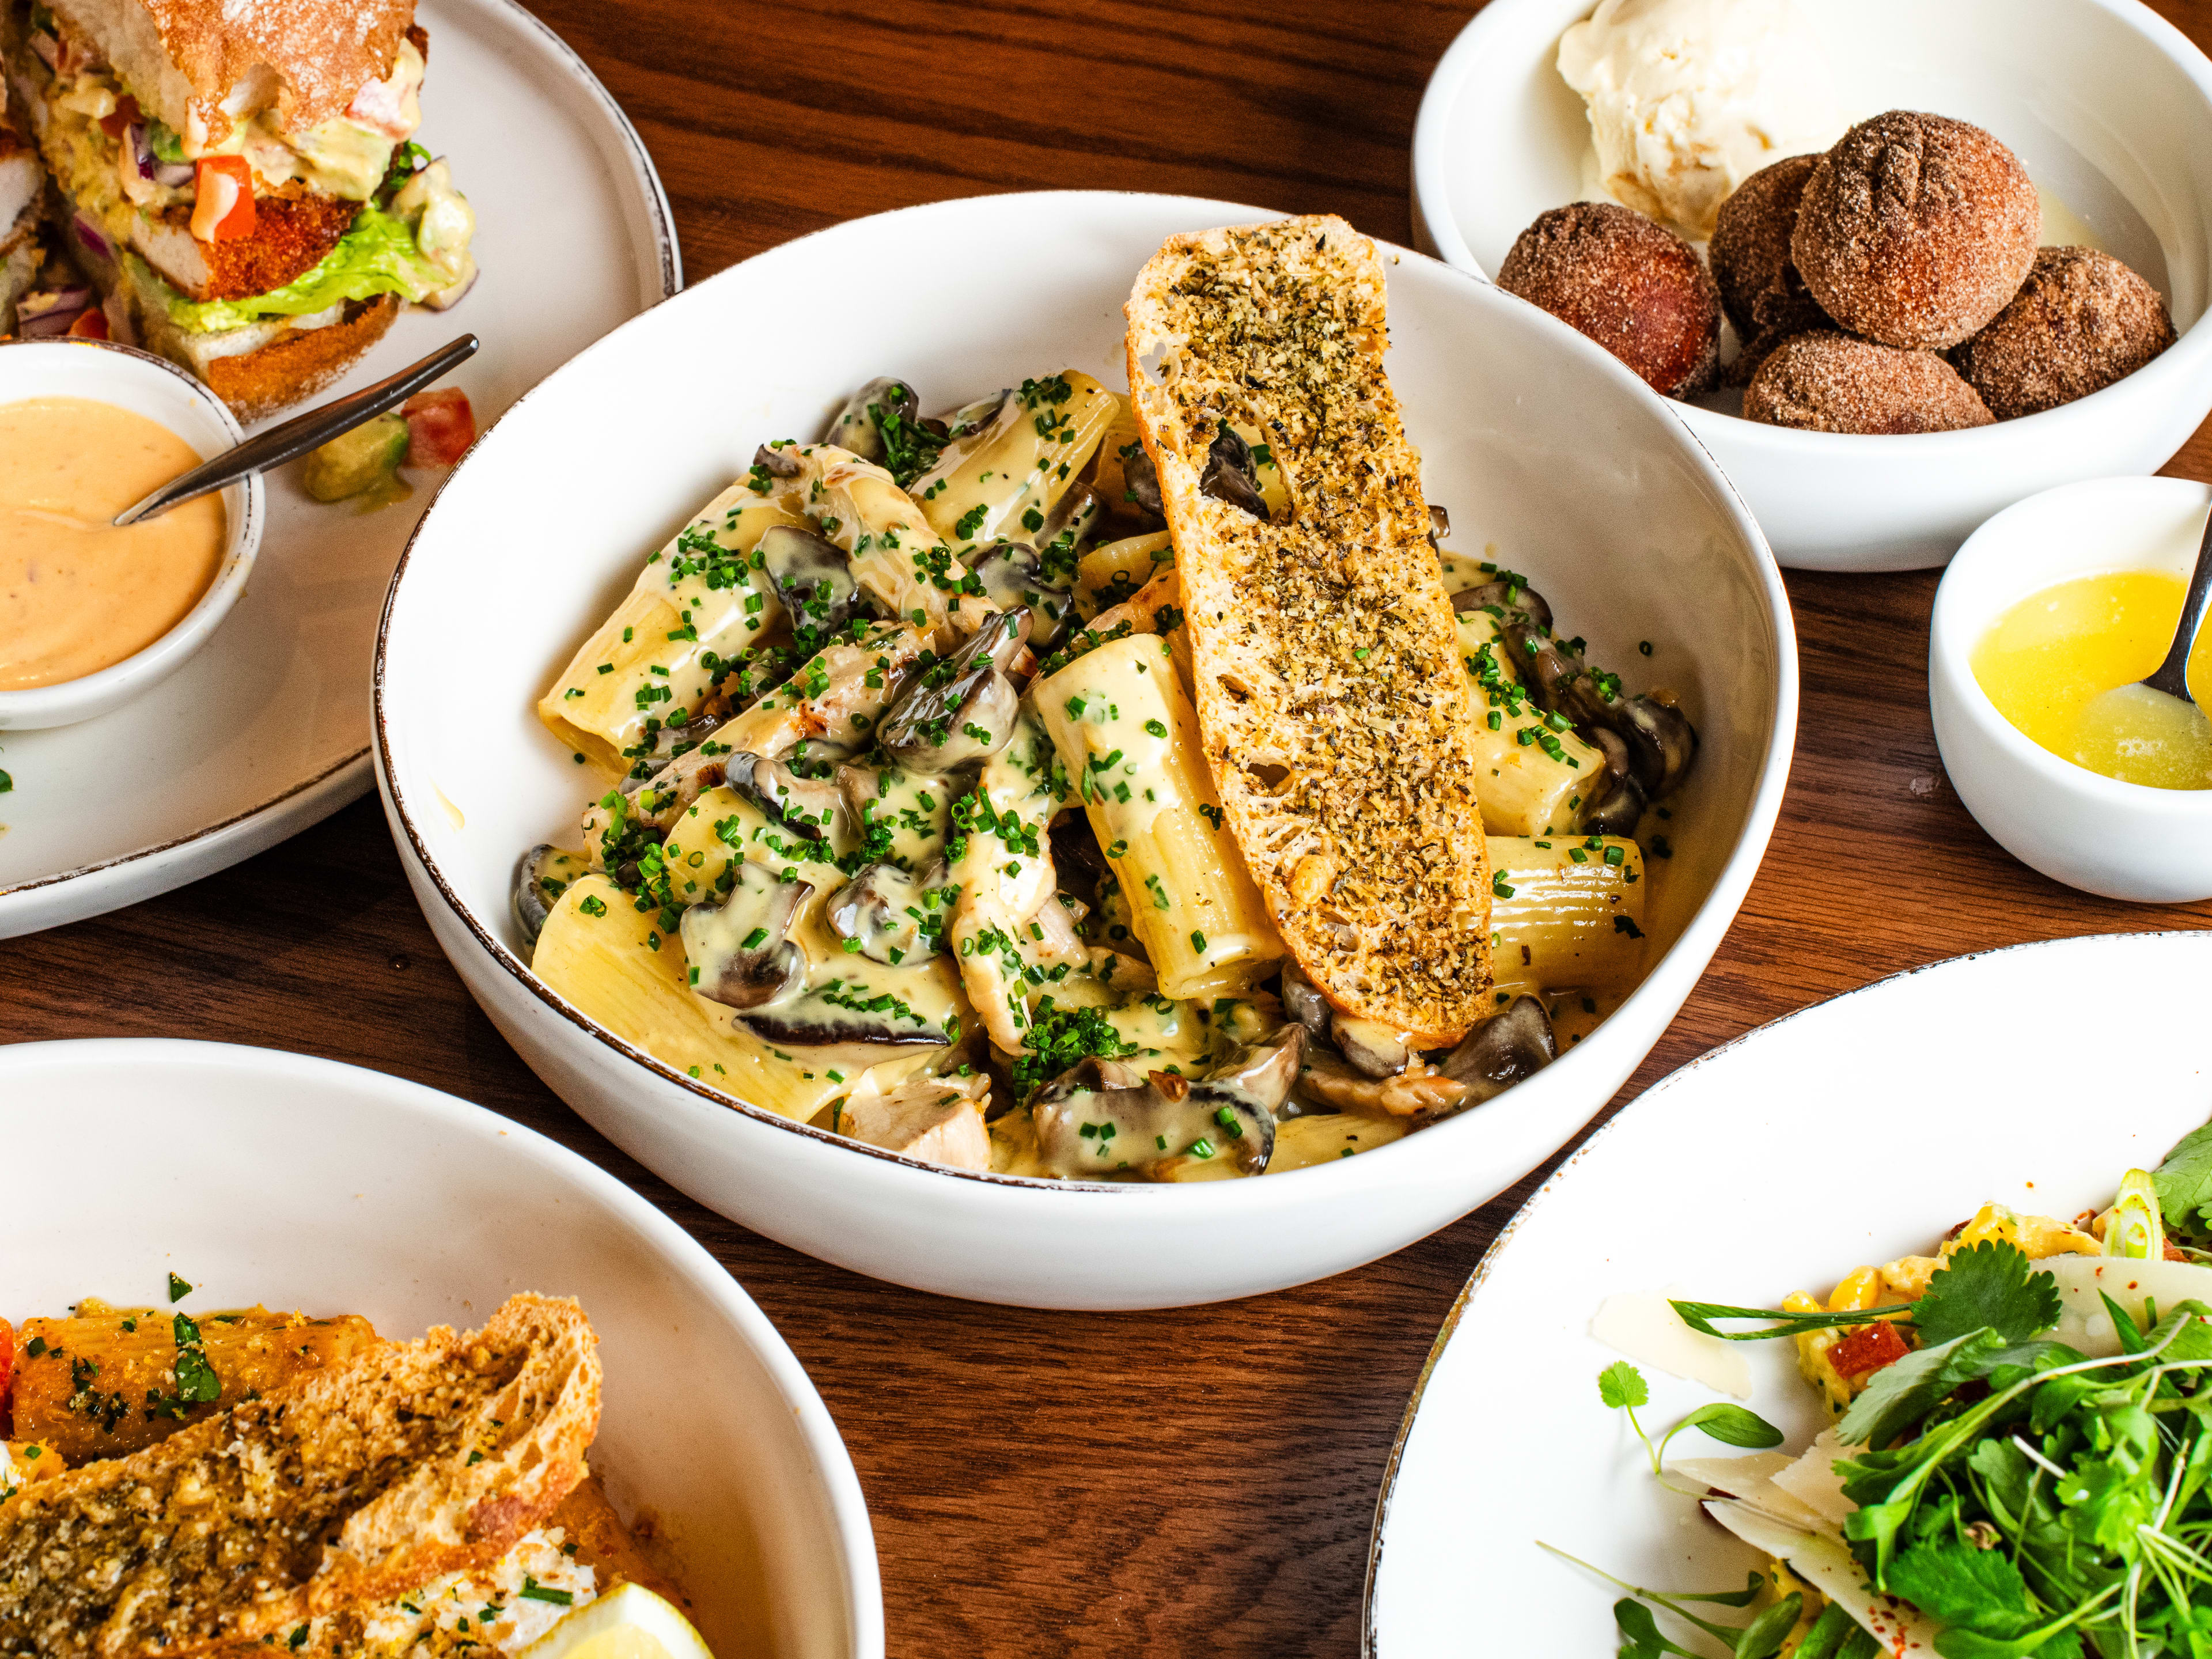 Various dishes from Tashas sit on a wooden table. Savva's Chicken Pasta is in the center.